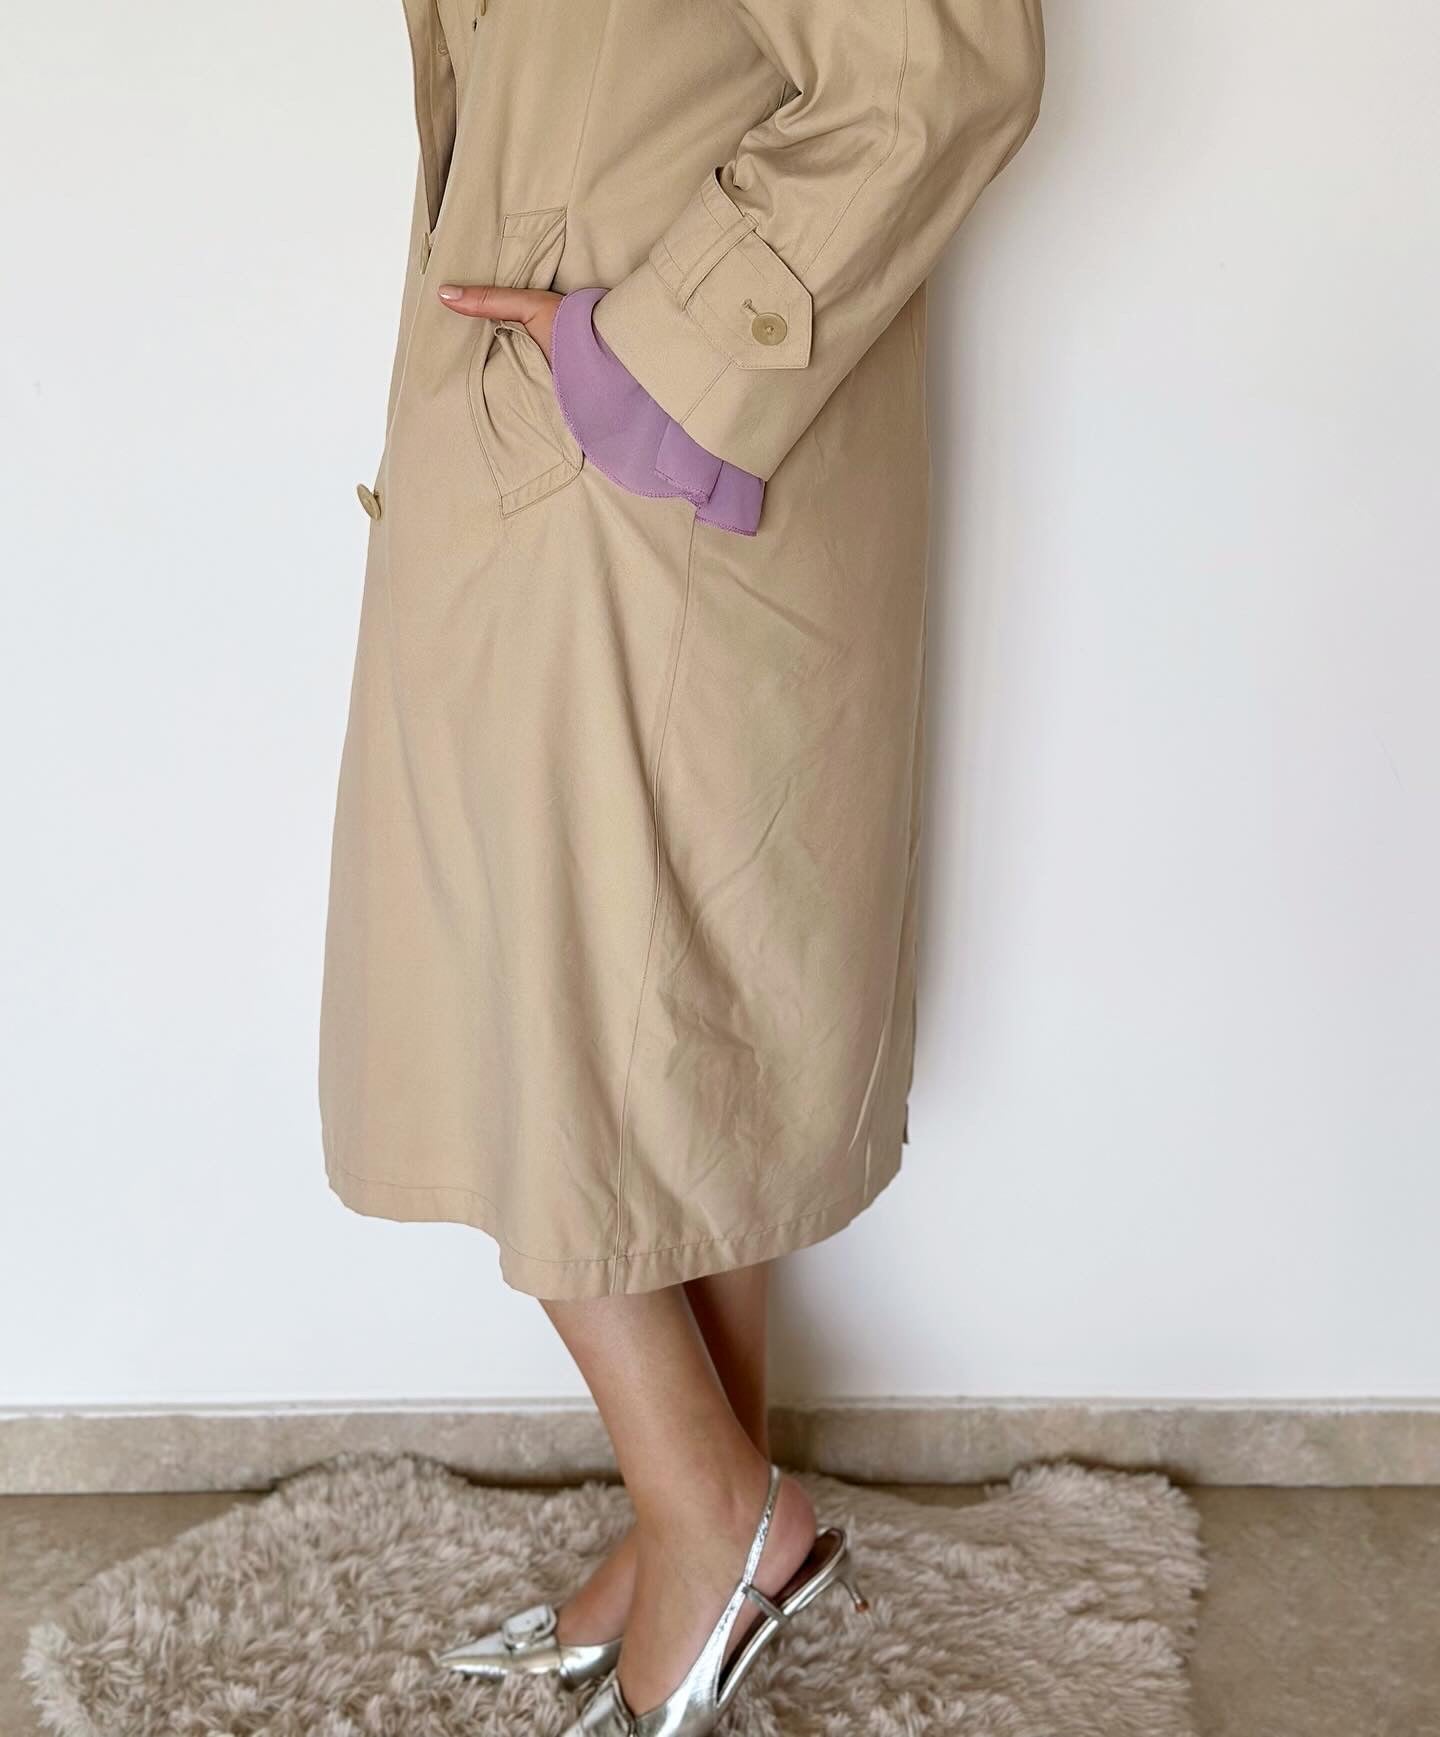 Gorgeous vintage double-breasted trench coat London Fog